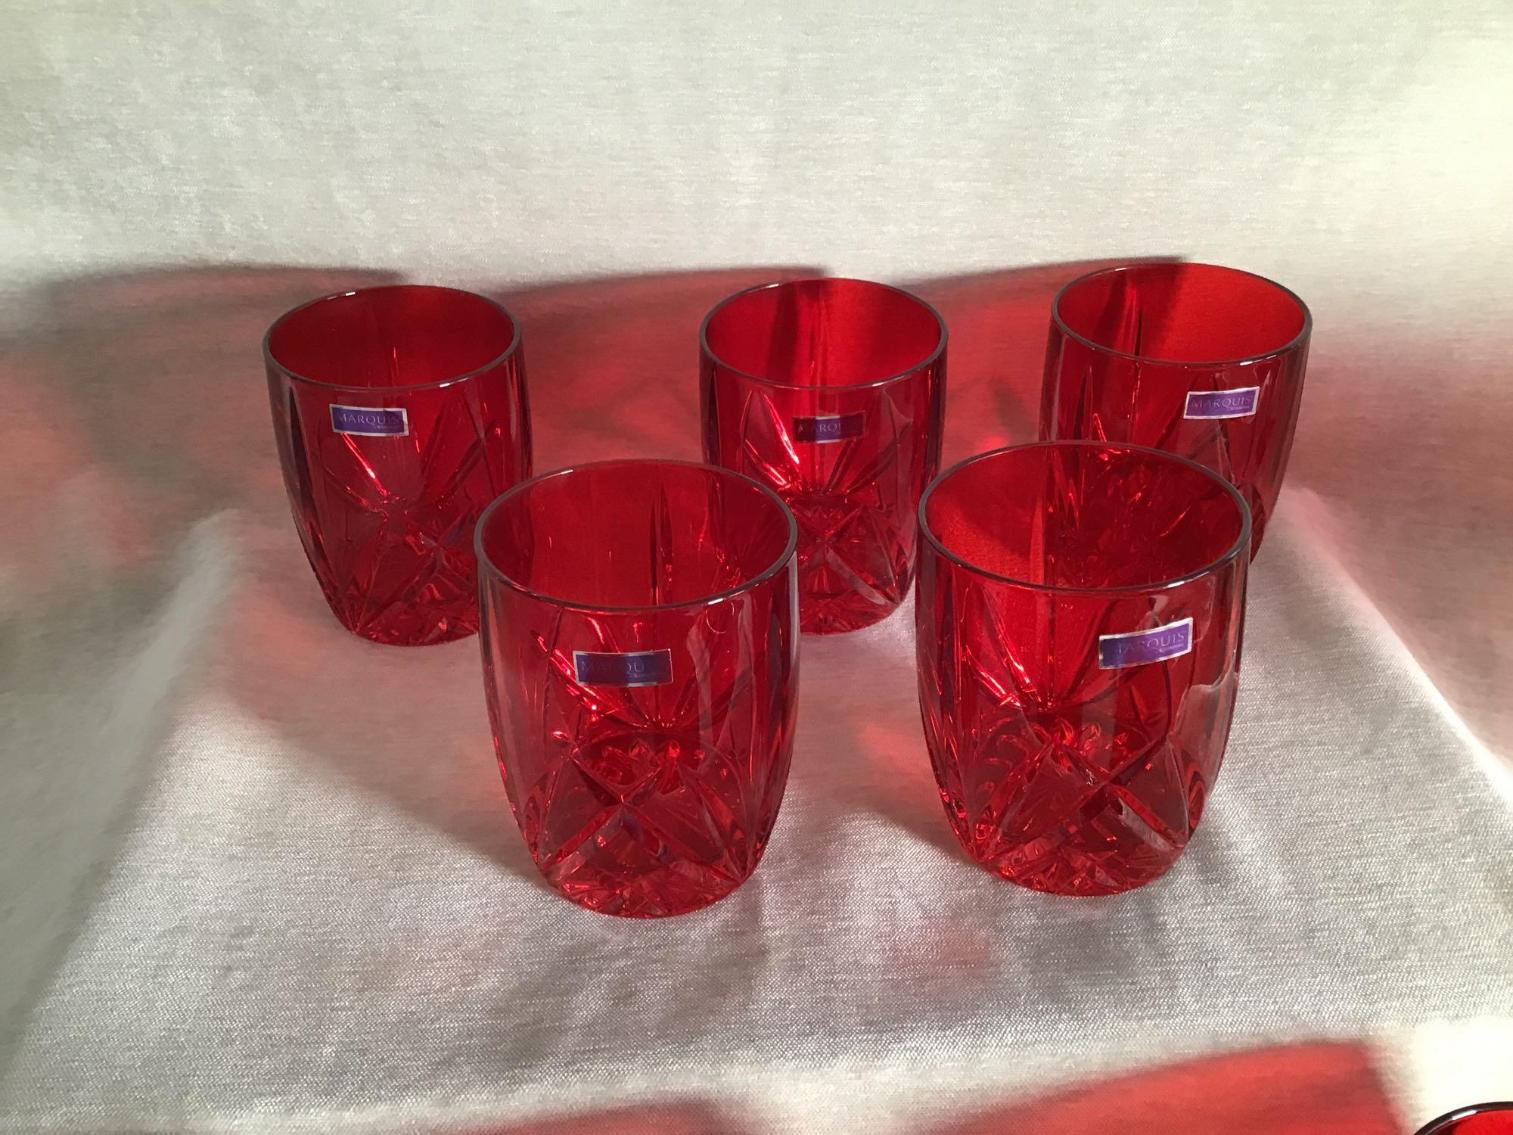 Image for Waterford Marquis Red Tumblers